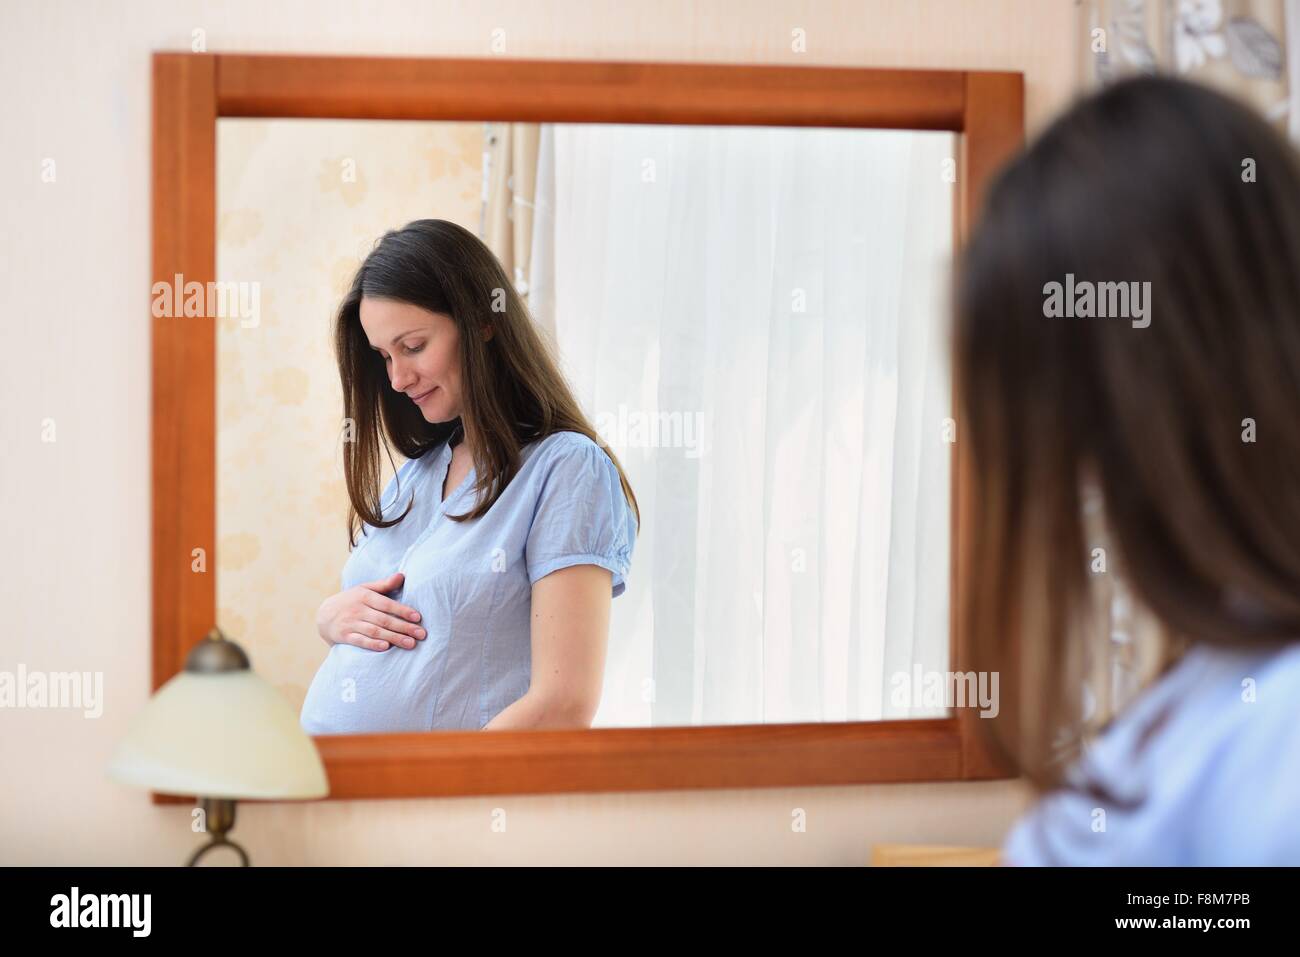 Pregnant woman holding estomac, standing in front of mirror Banque D'Images